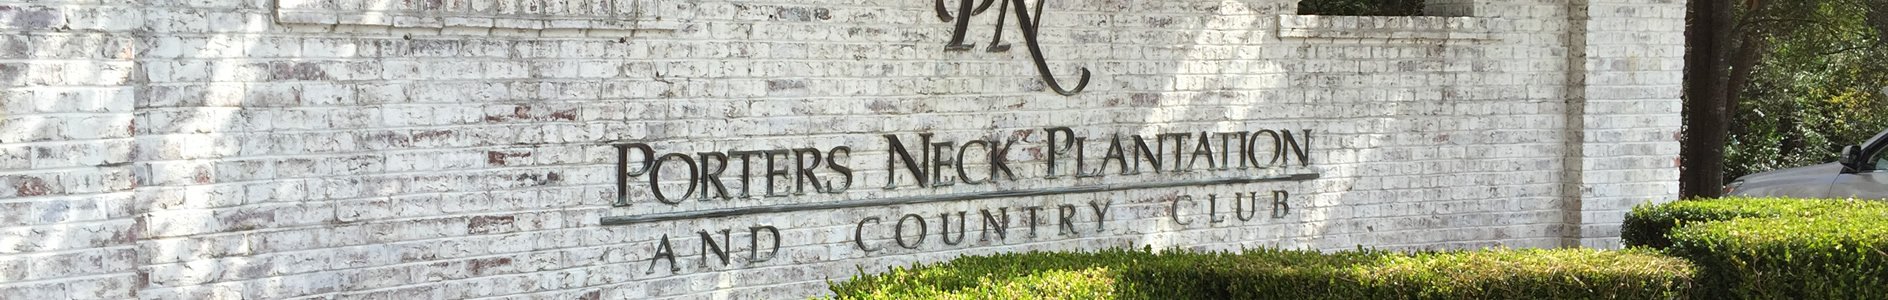 Porters Neck Plantation and Country Club